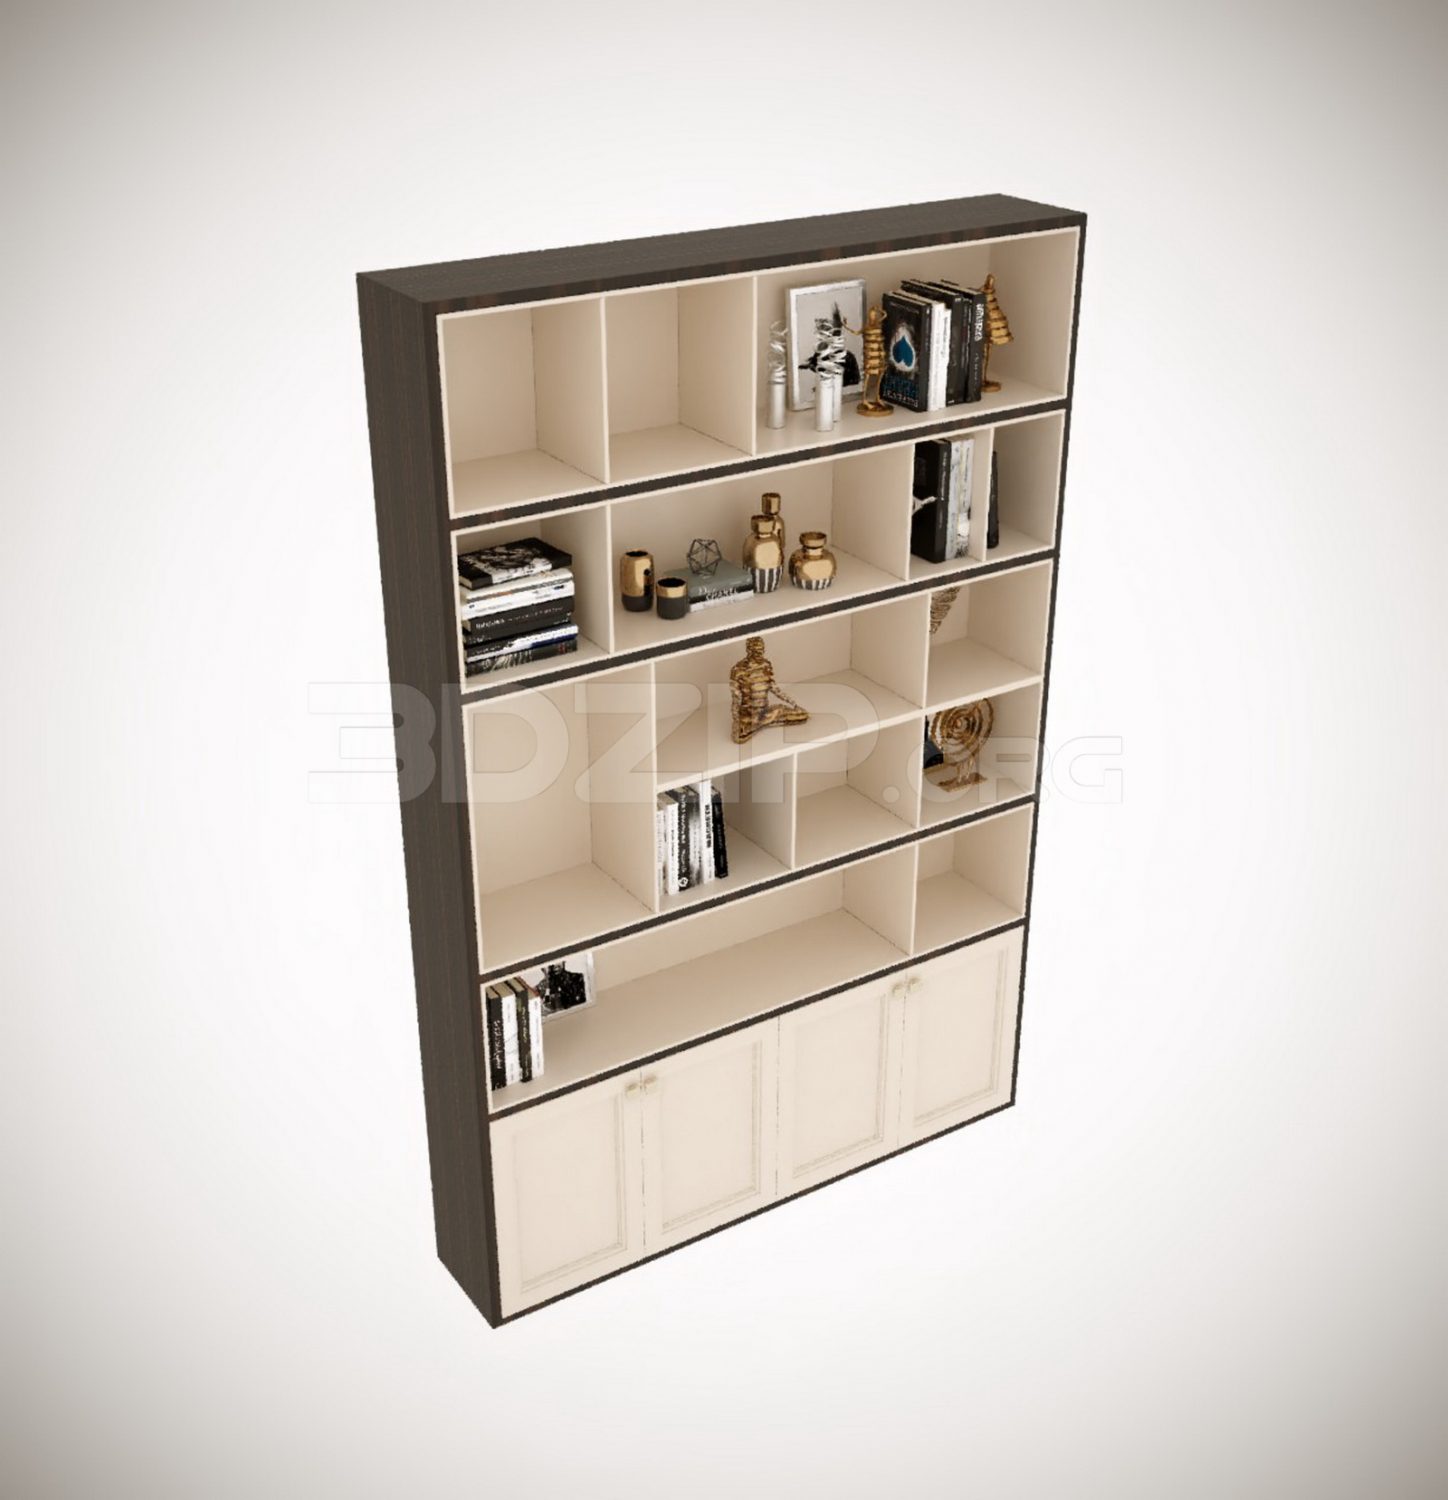 10440. Download Free Display Cabinets Model By Minh Khanh